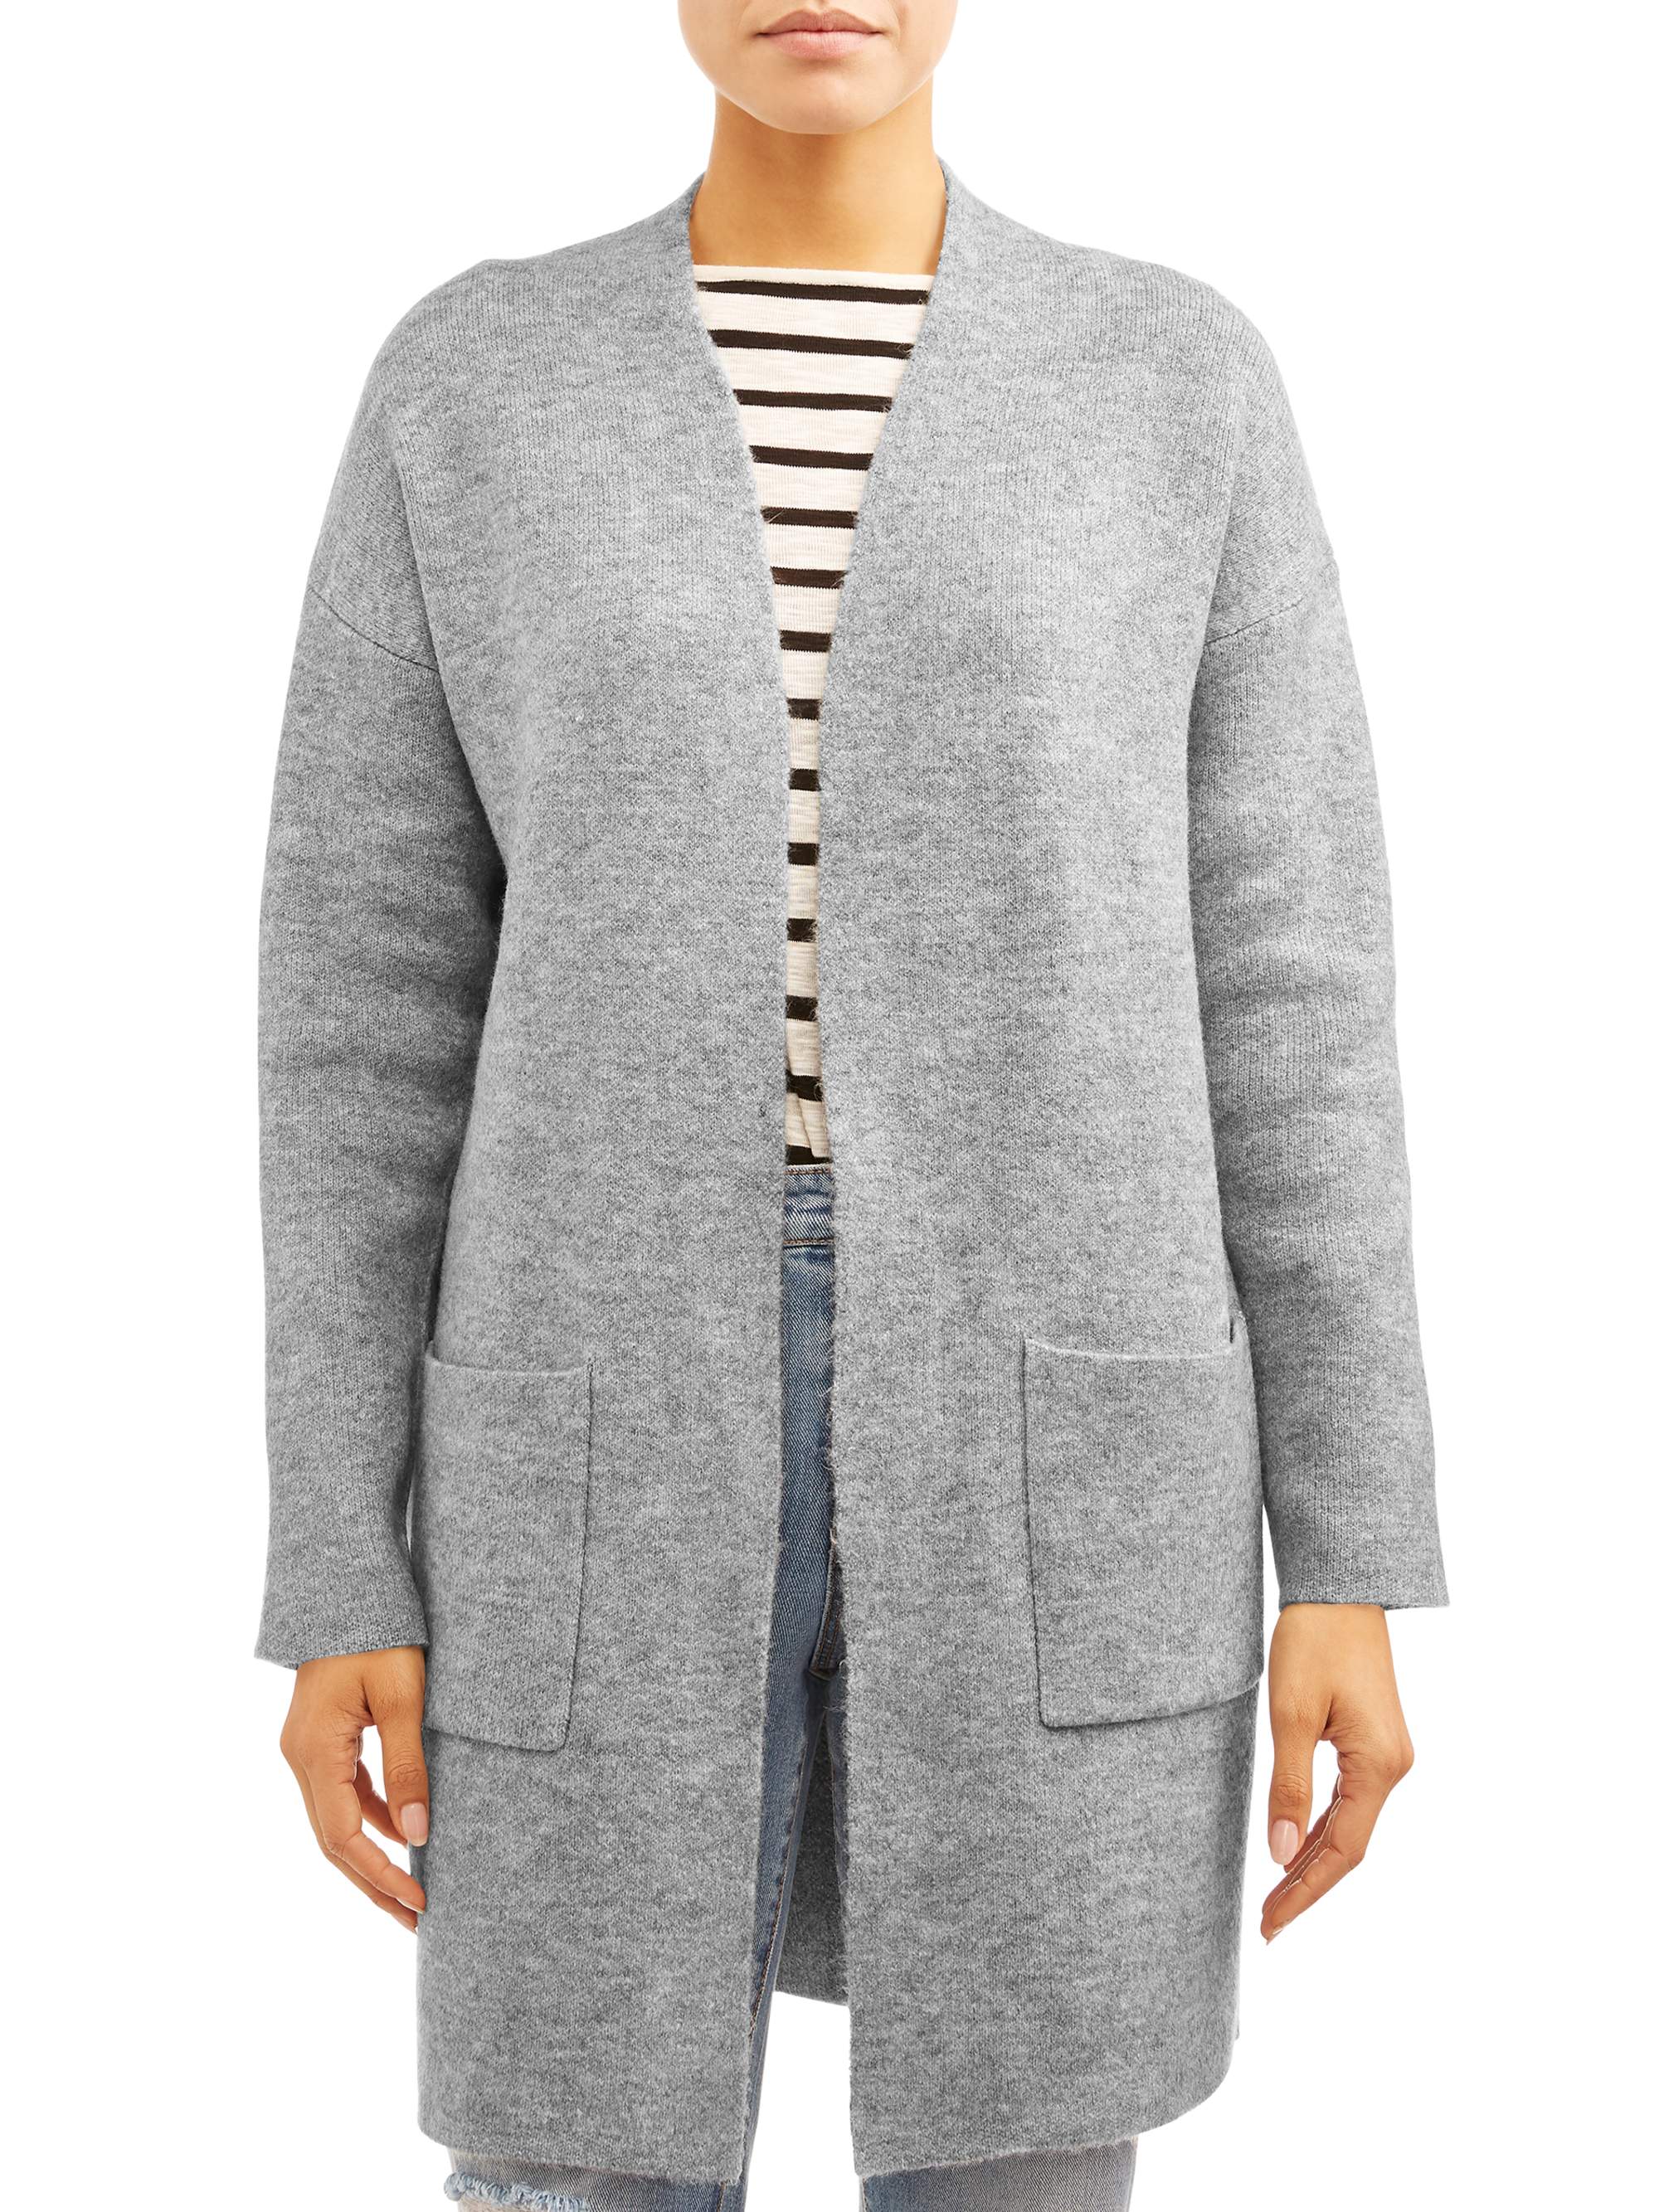 12 Cardigans That’ll Give You All The Cozy Vibes For Fall